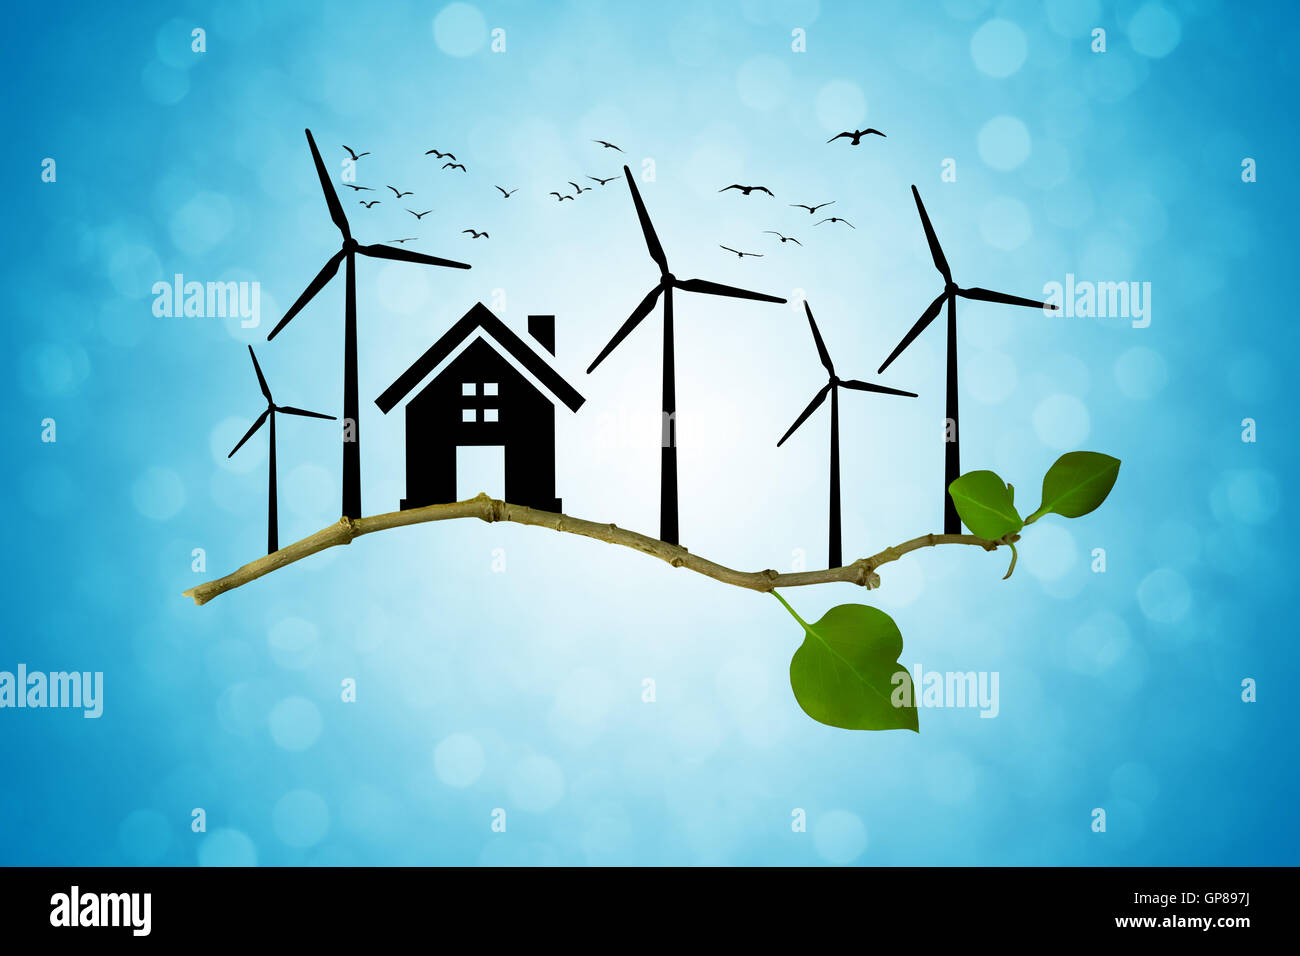 Environmental green energy concept. Silhouette of house, wind turbine and birds flying on a tree branch Stock Photo